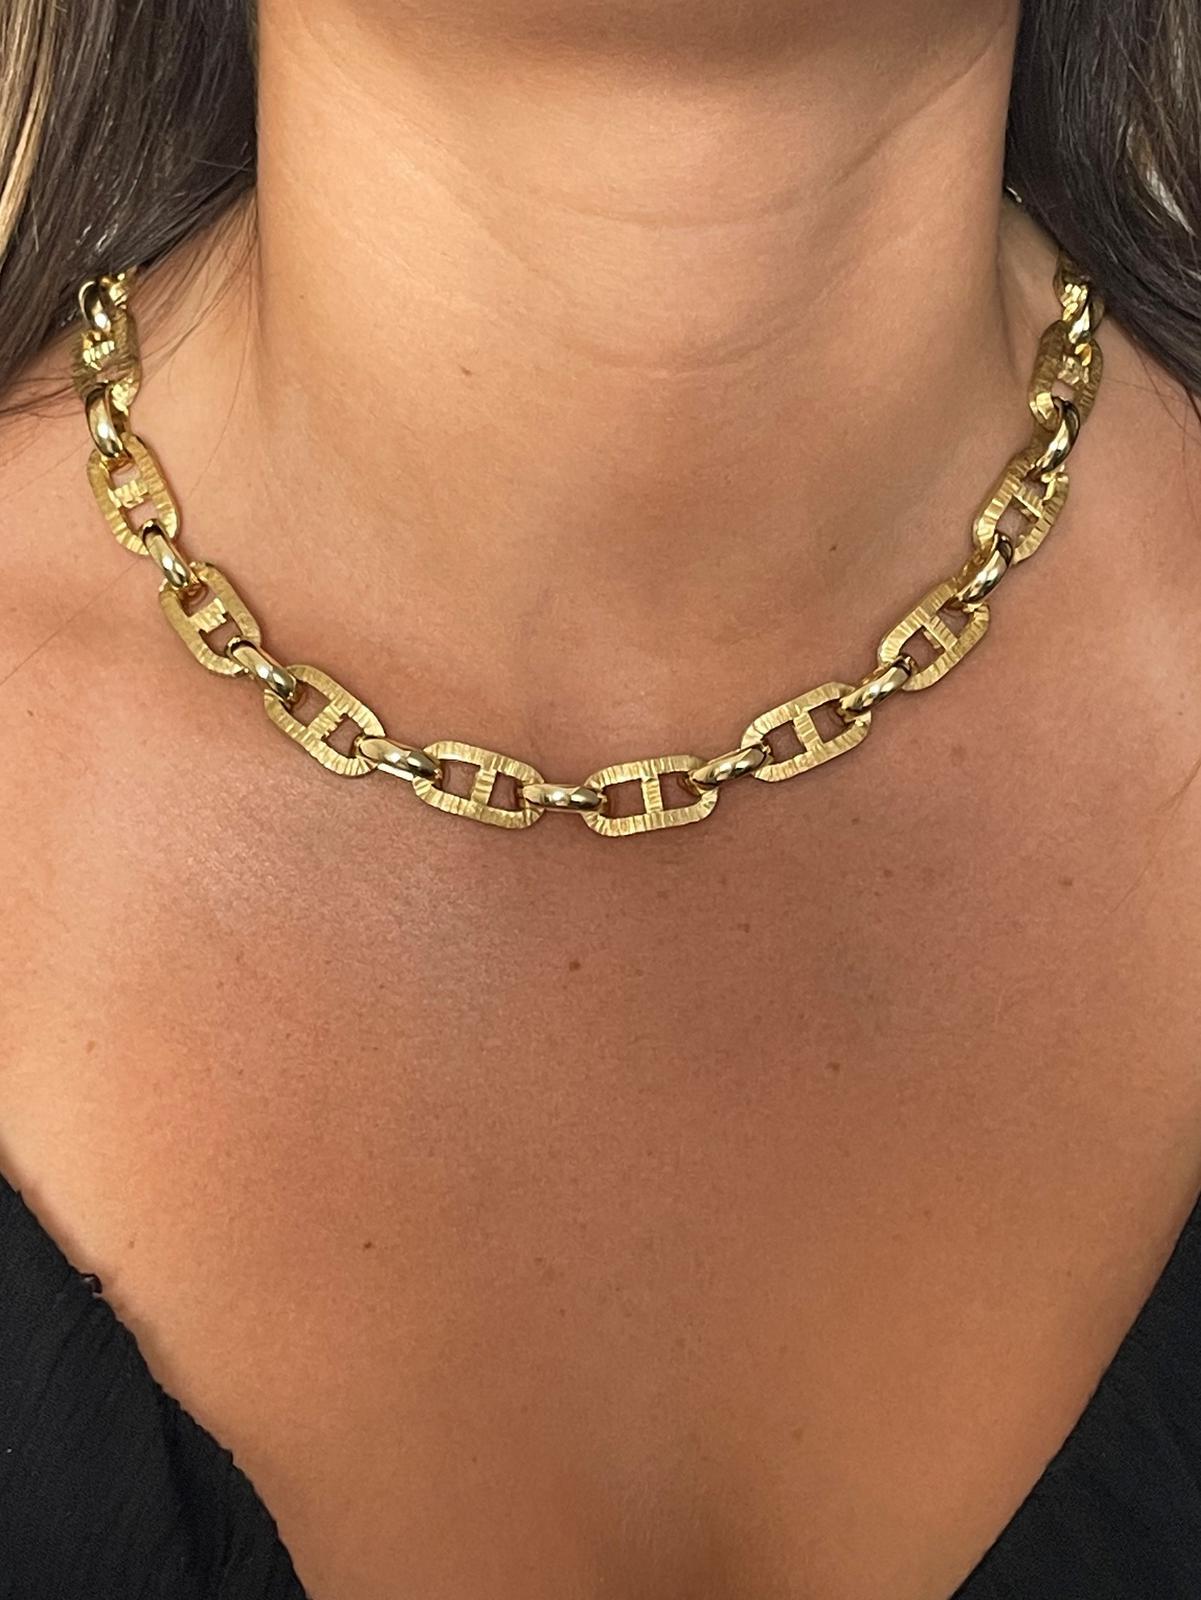 Necklace in yellow gold 750 thousandths (18 carats). matte and glossy alternating marine mesh. length: 47 cm. width: 1.02 cm. total weight: 45.43g. buoy clasp. eagle head hallmark. excellent condition.
